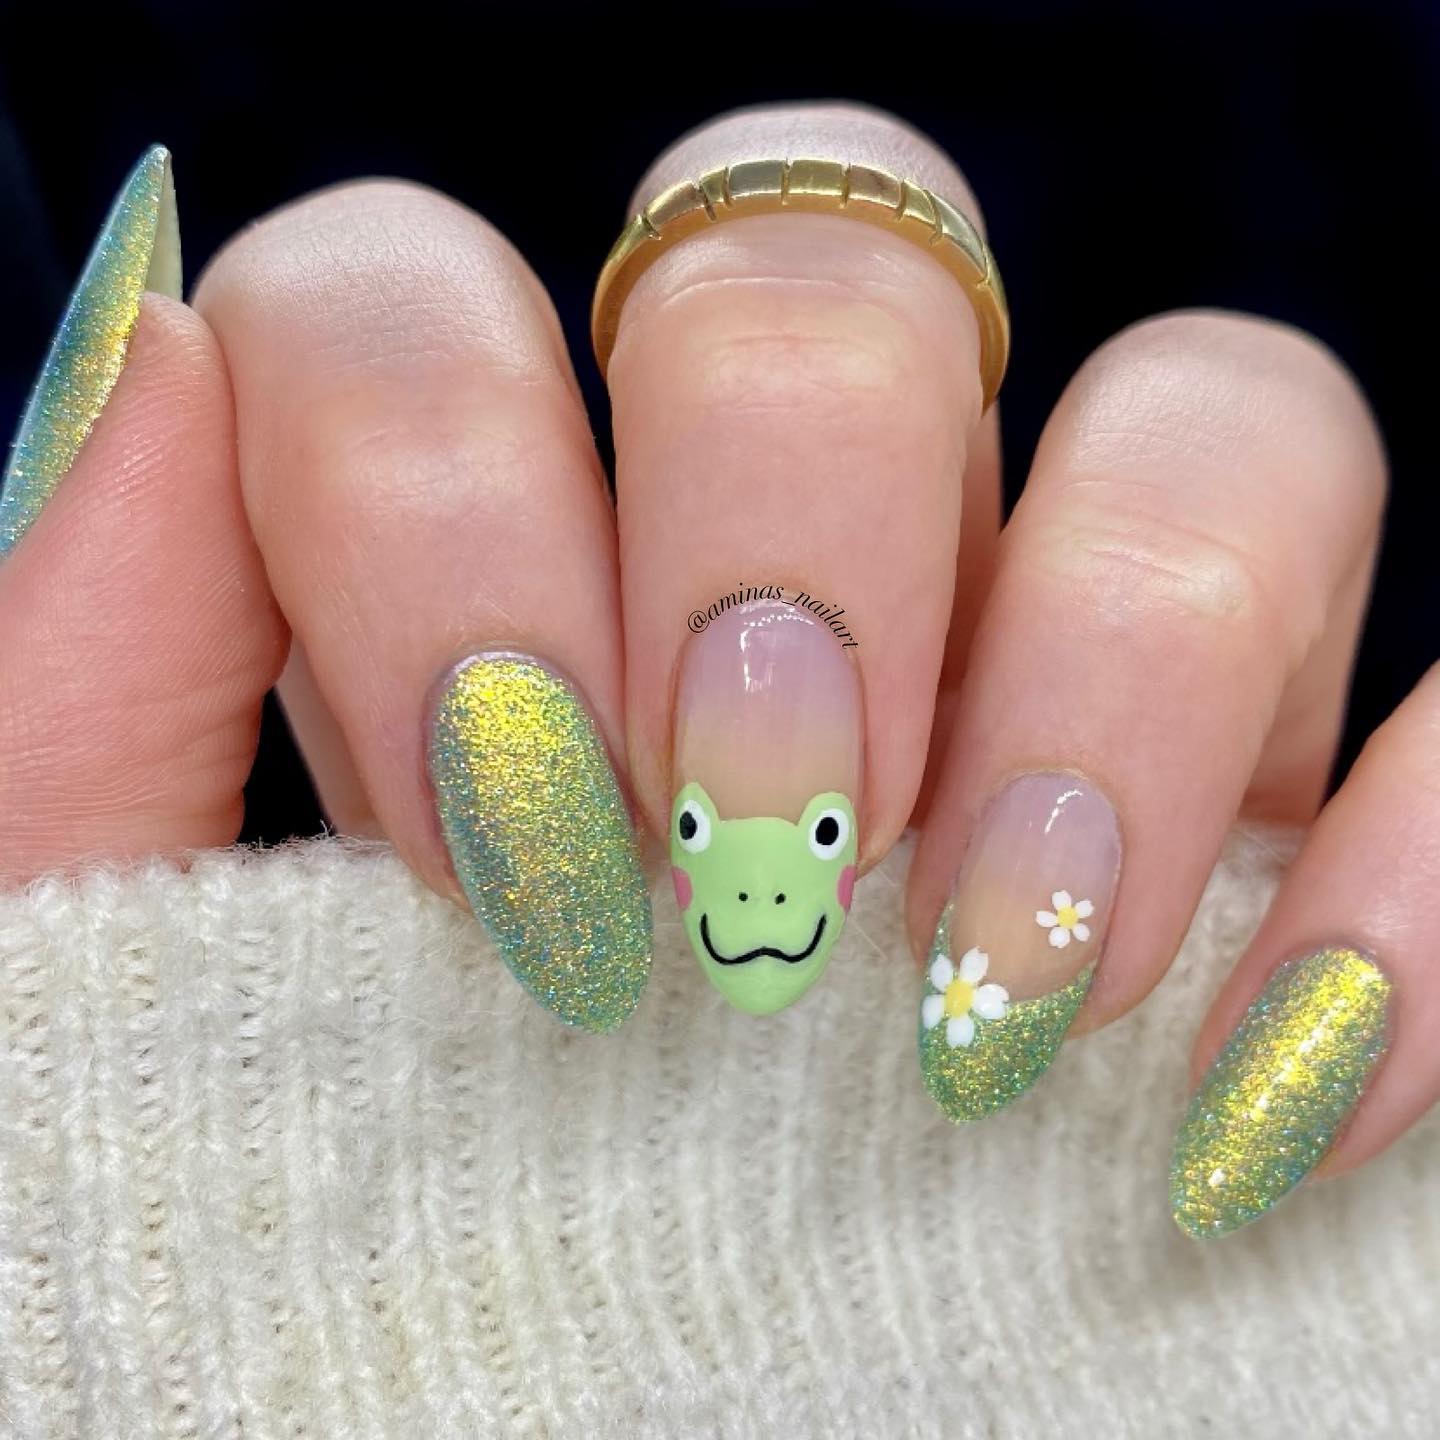 Experiment with this green manicure if you dare! Women who like to draw around or those who want to give it a go with some funky stickers will like this design.